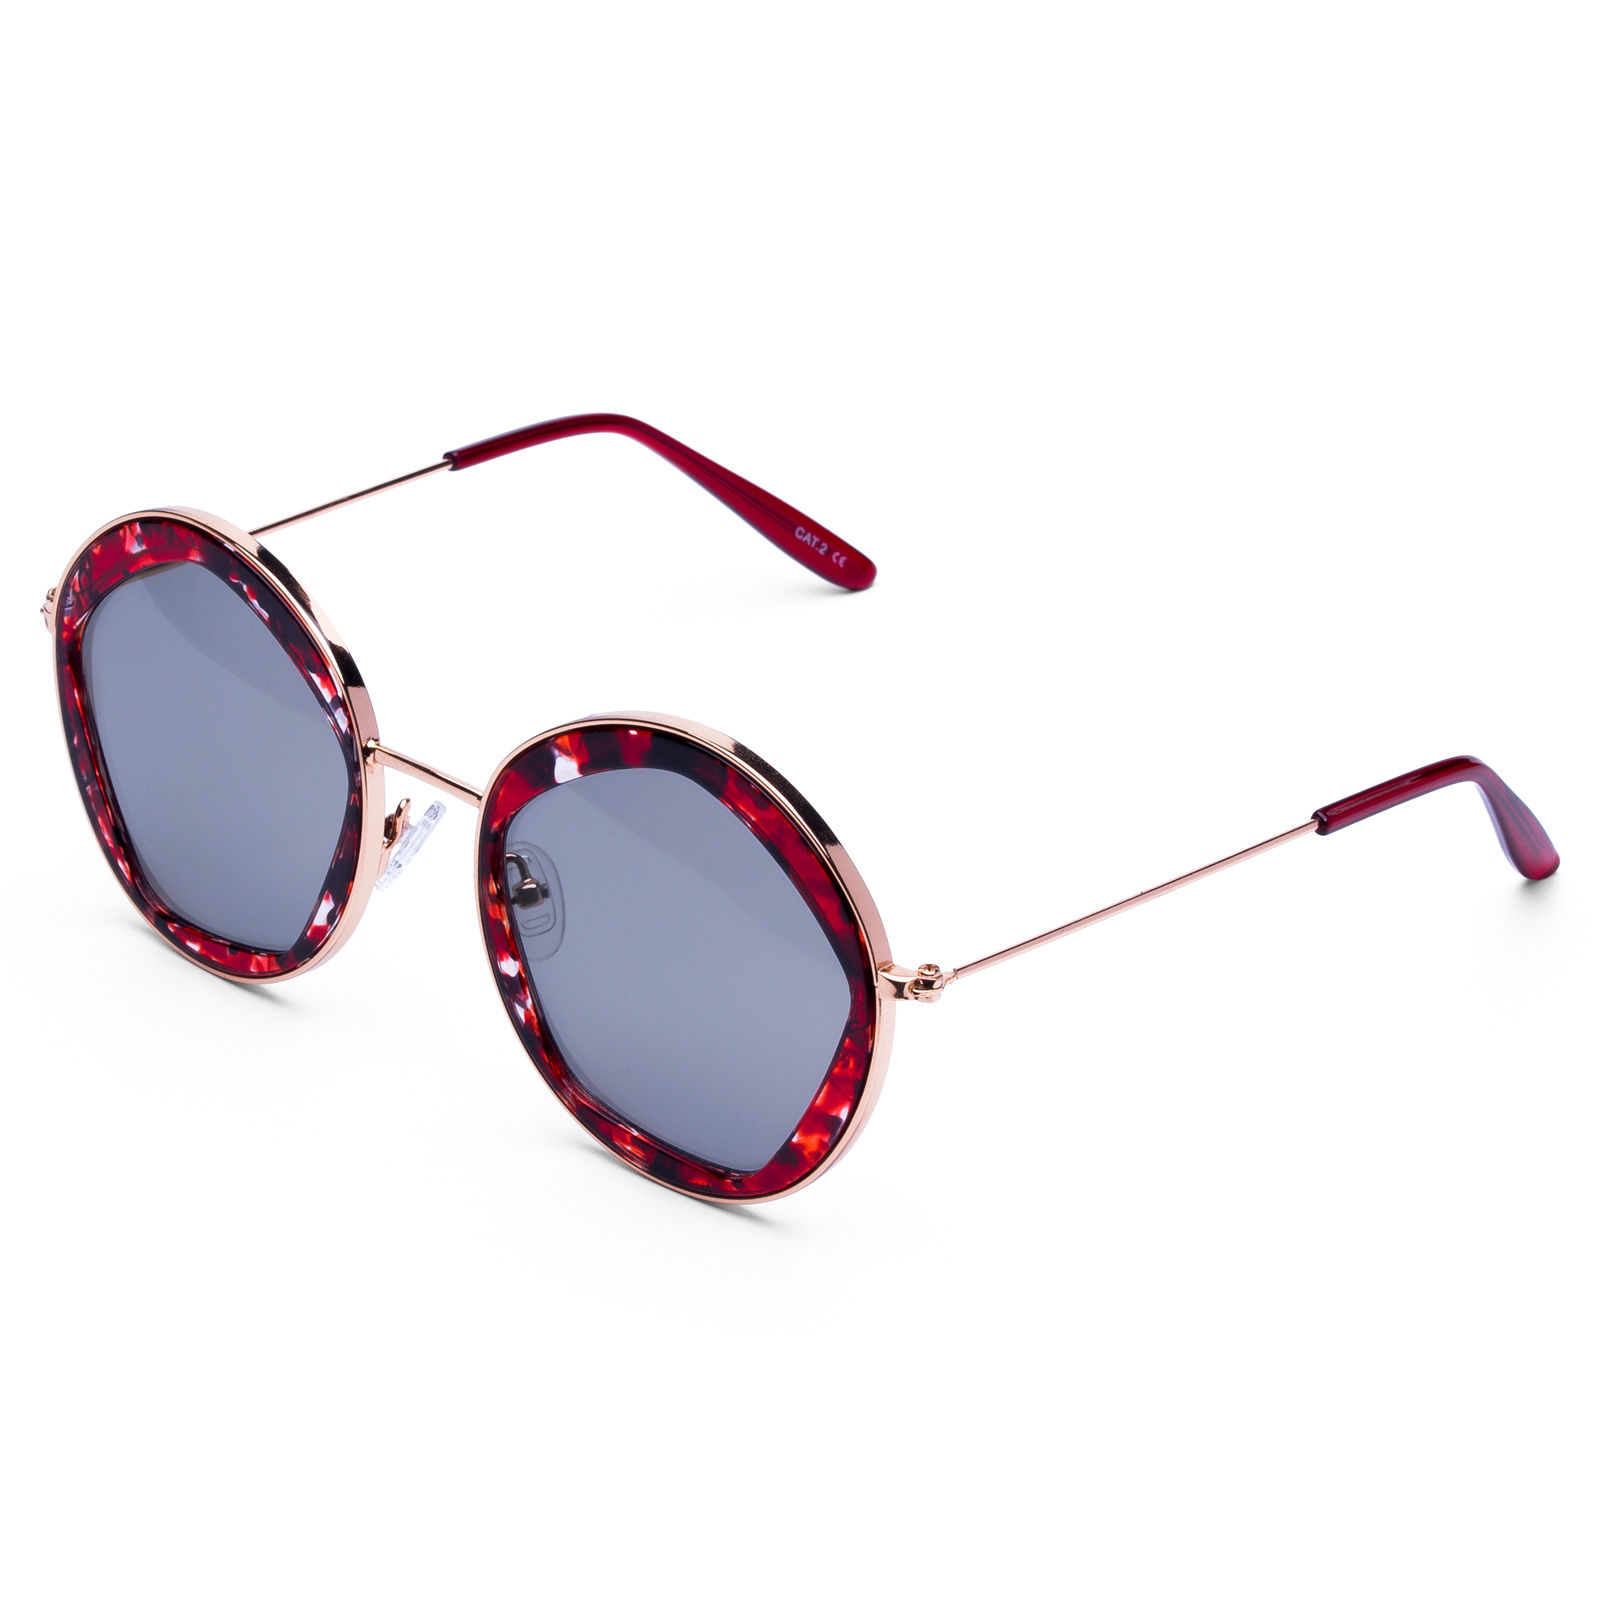 Sunglasses for Women, Vintage Round Metal Frame Style, UV400 Protection Sun glasses for Lady